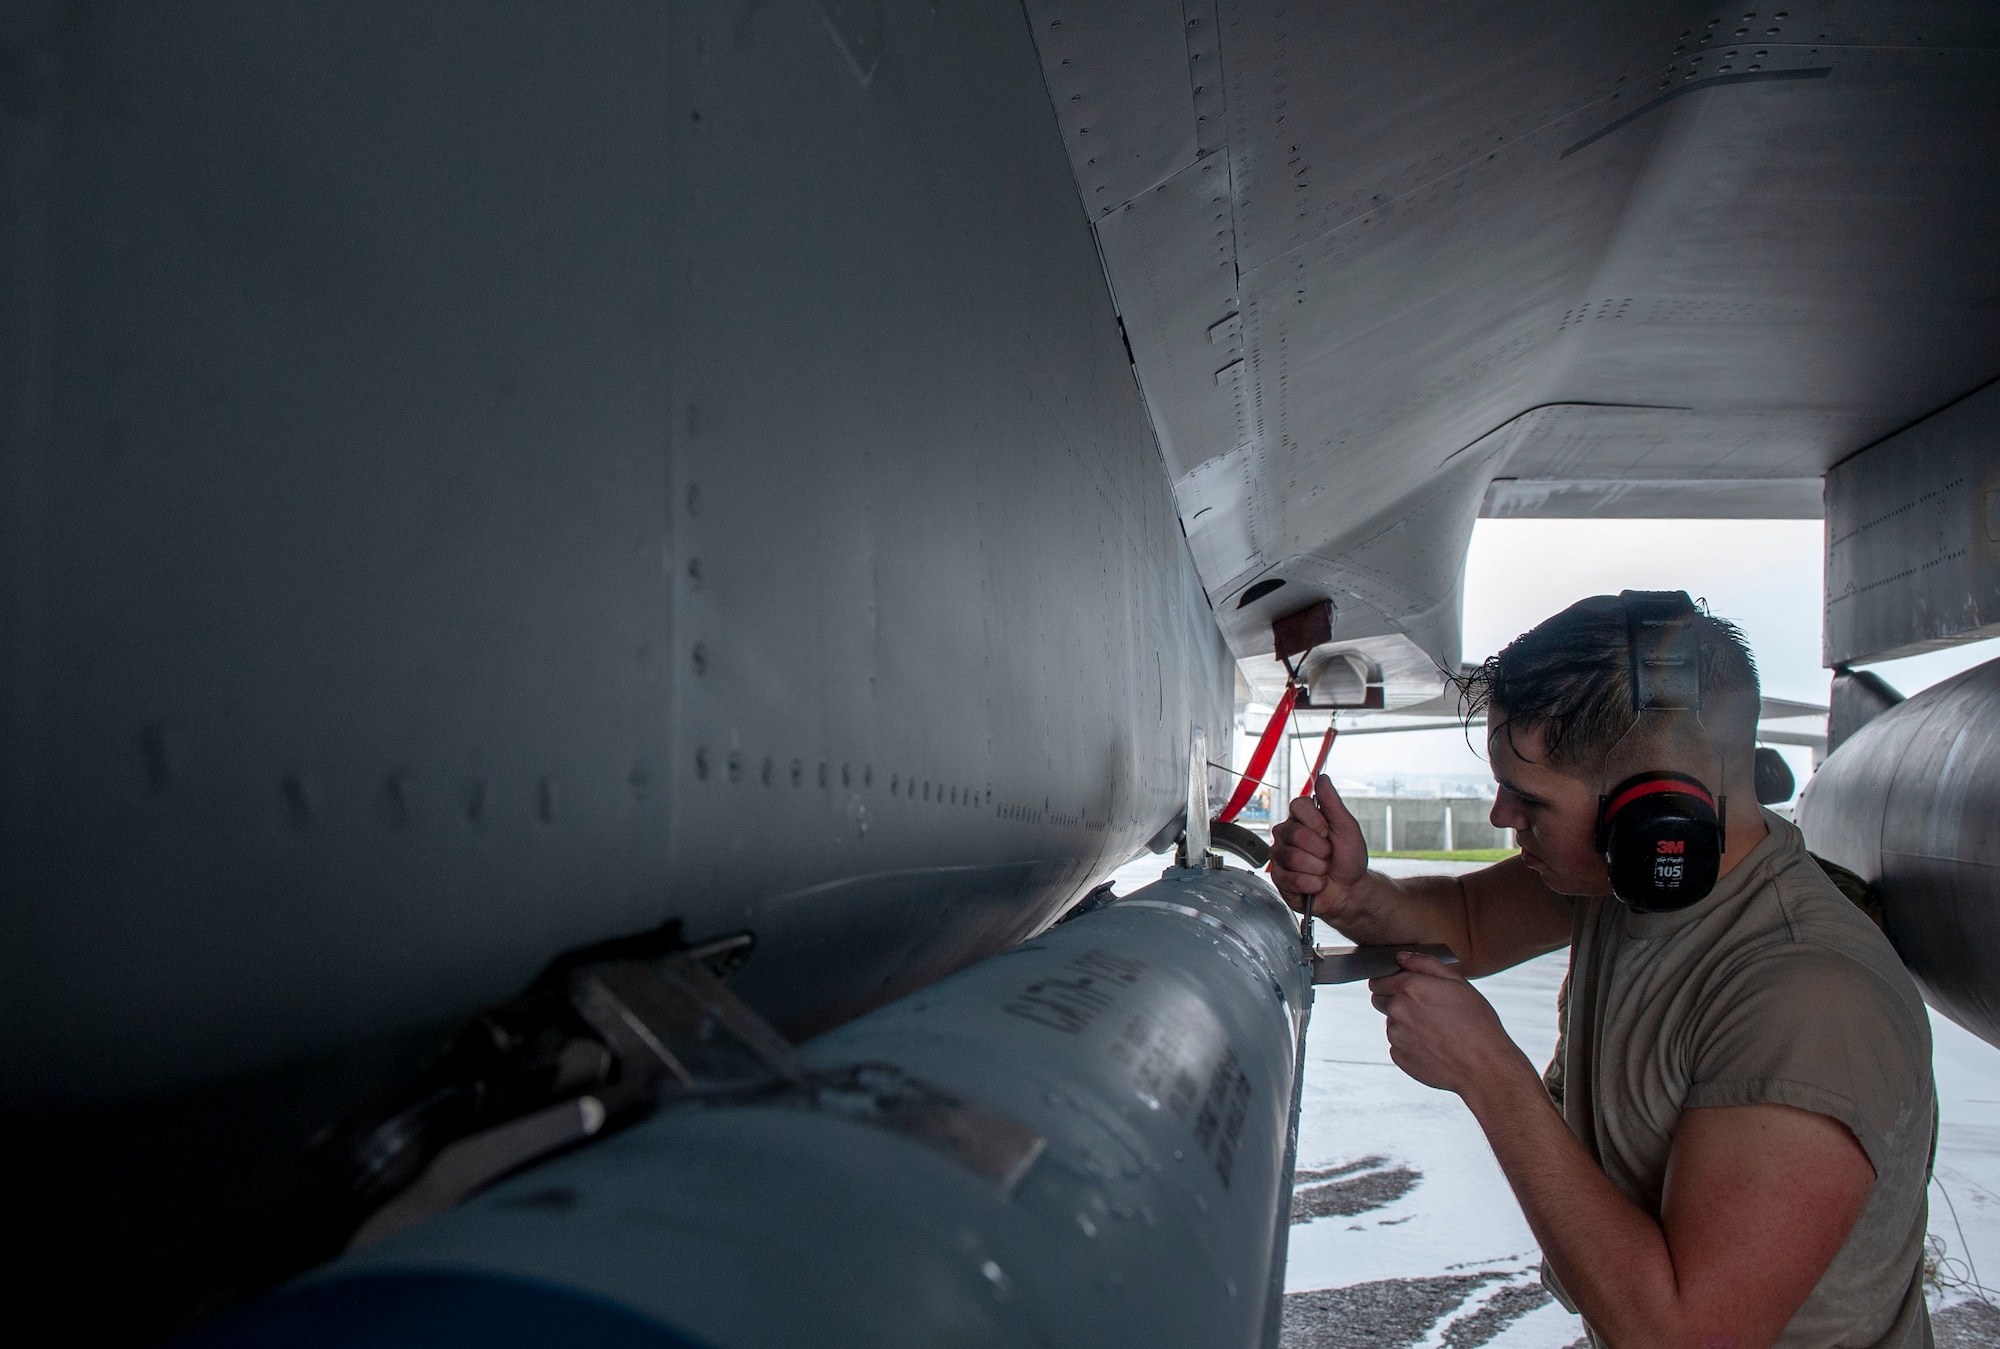 U.S. Air Force Airman 1st Class Jeffrey Abbey, 67th Aircraft Maintenance Unit load crew member, attaches a blade of an AIM-120 advanced medium-range air-to-air missile during the annual weapons load competition at Kadena Air Base, Japan, Jan. 17, 2020. Each team must load the munition onto an F-15C Eagle aircraft with speed and precision. (U.S. Air Force photo by Naoto Anazawa)